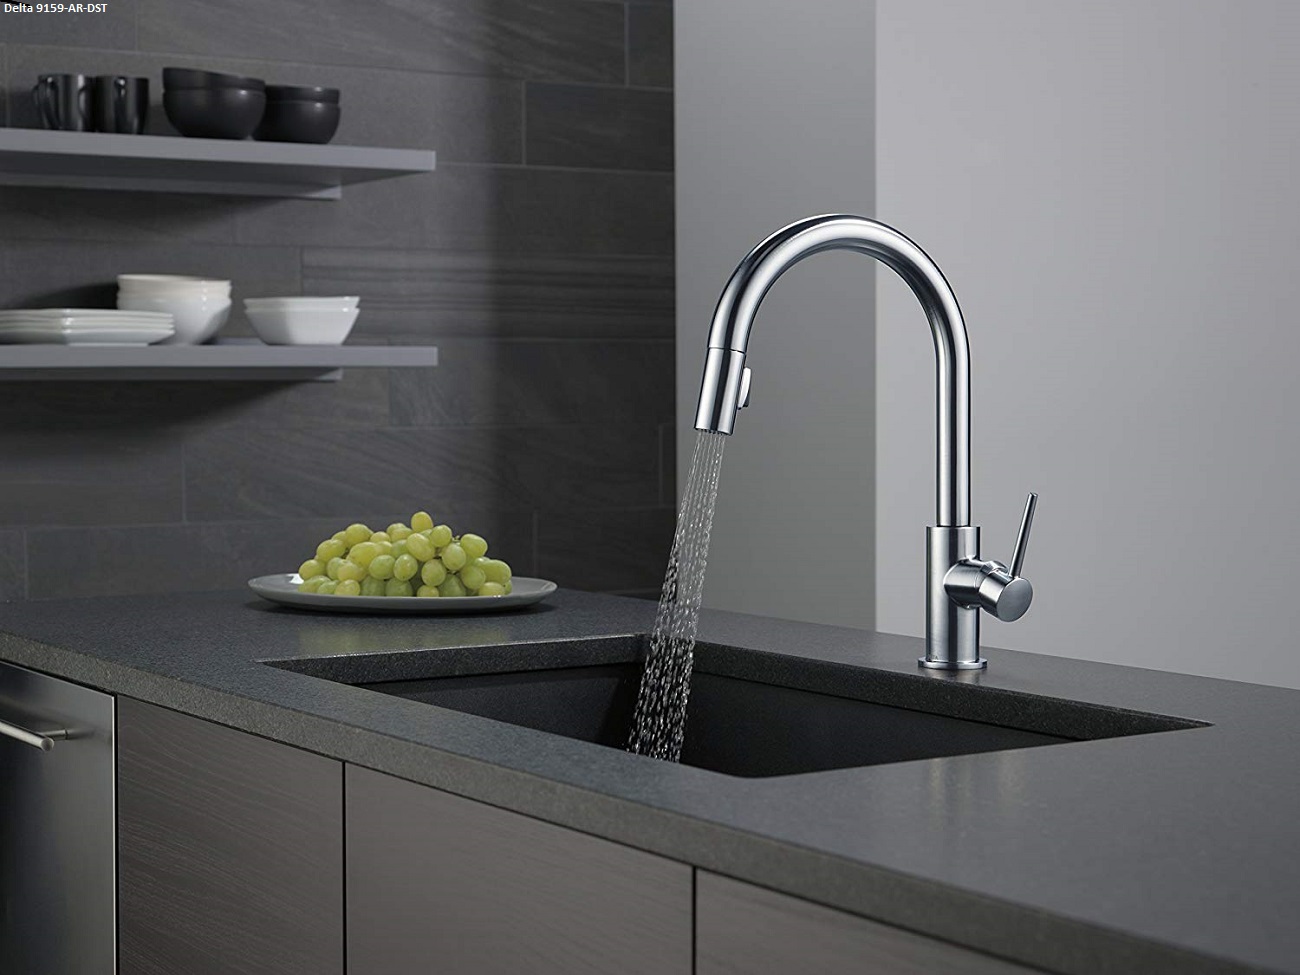 6 Best Kitchen Faucets Under 200 Dollars - Inexpensive and Well-Designed (Winter 2023)